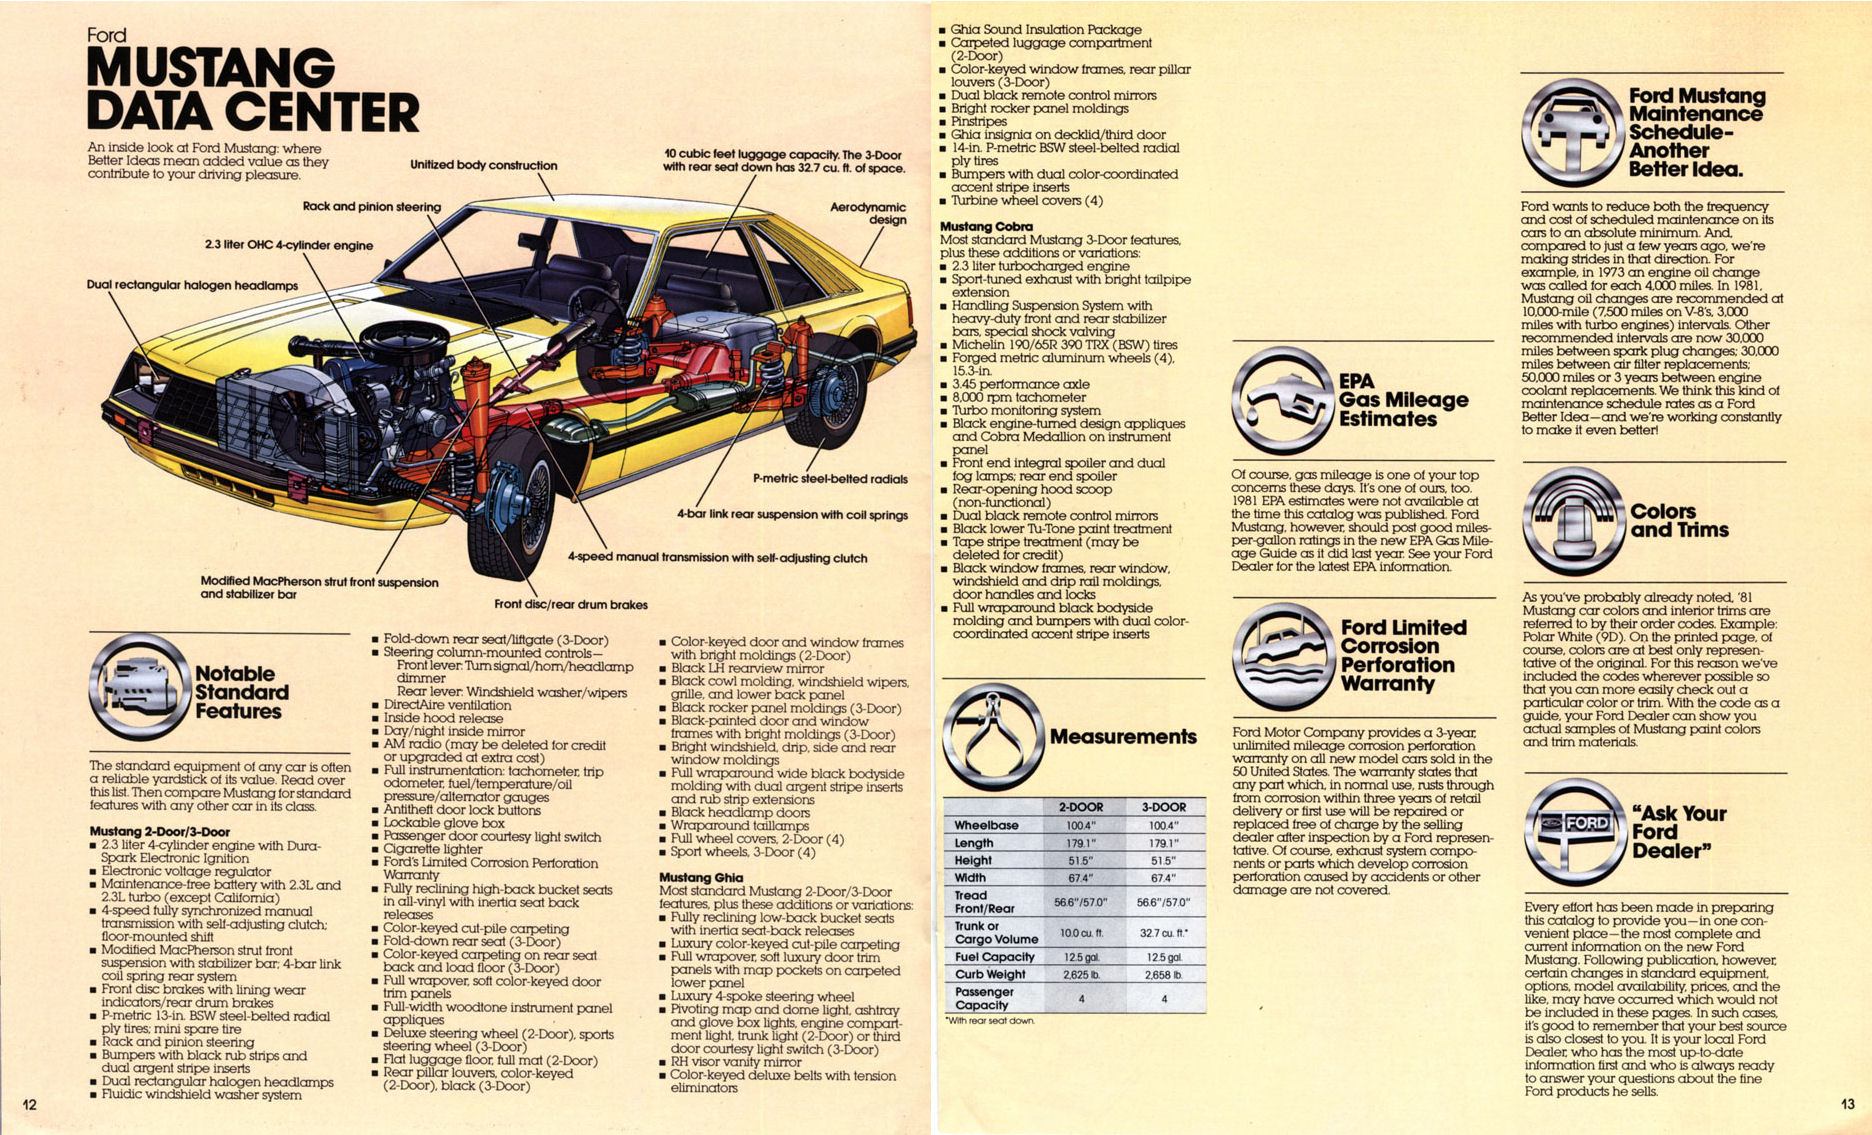 1981_Ford_Mustang-12-13